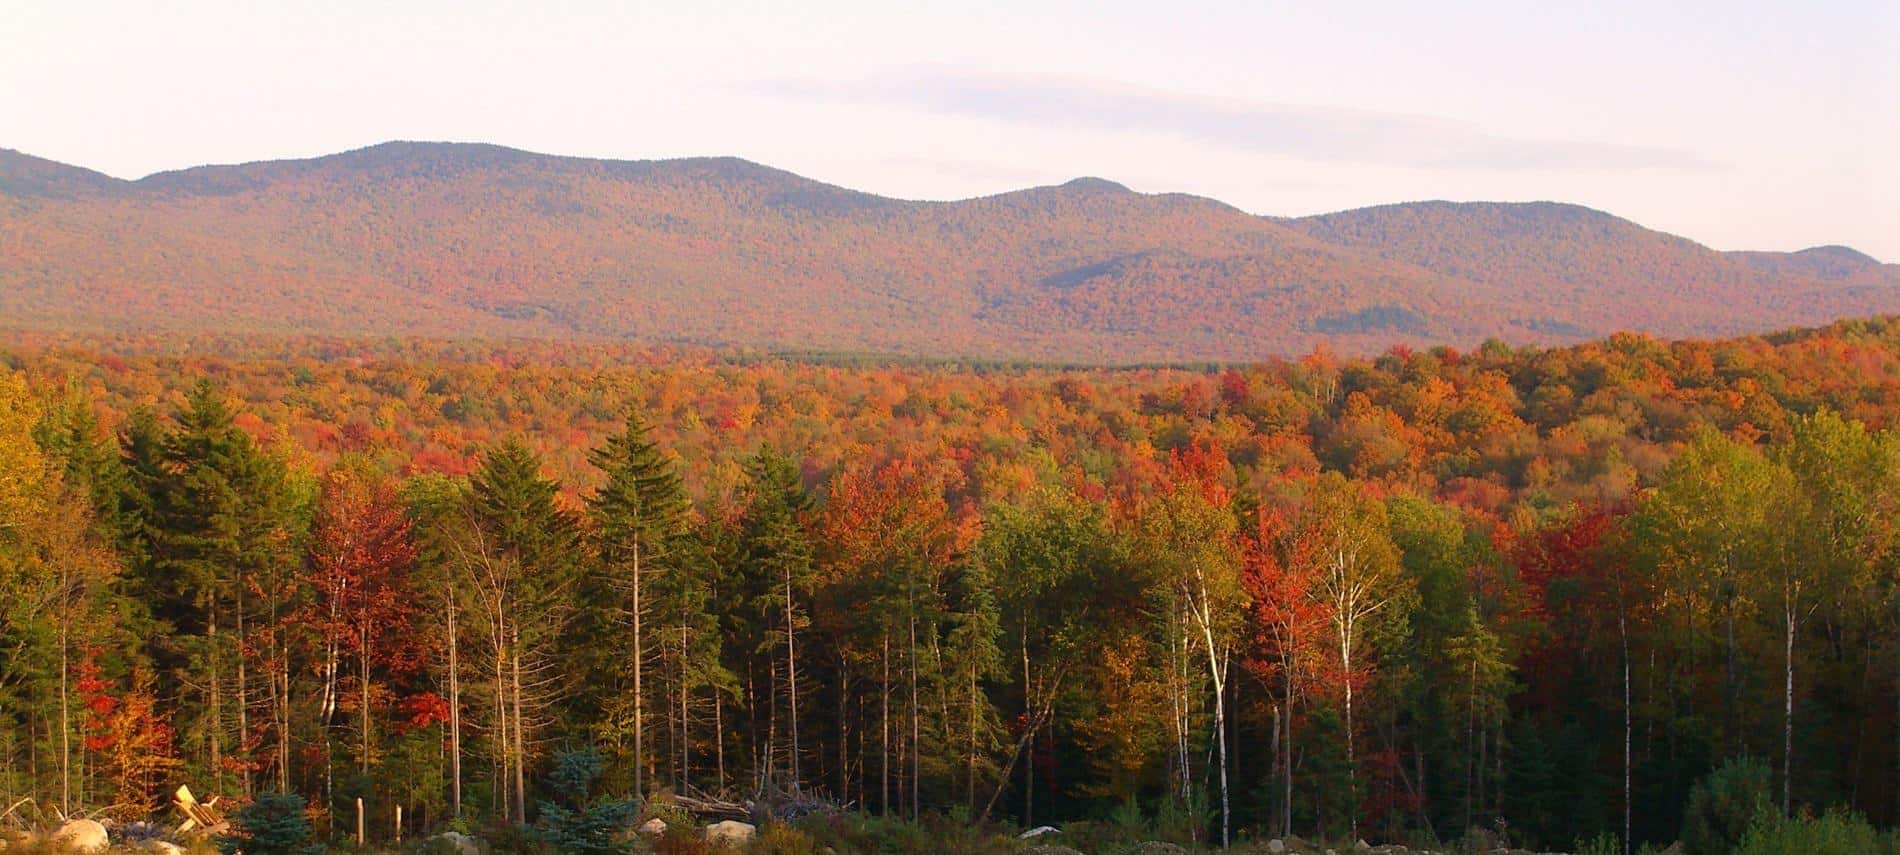 Stunning view of the surrounding tree covered hills in the fall with colorful fall foliage